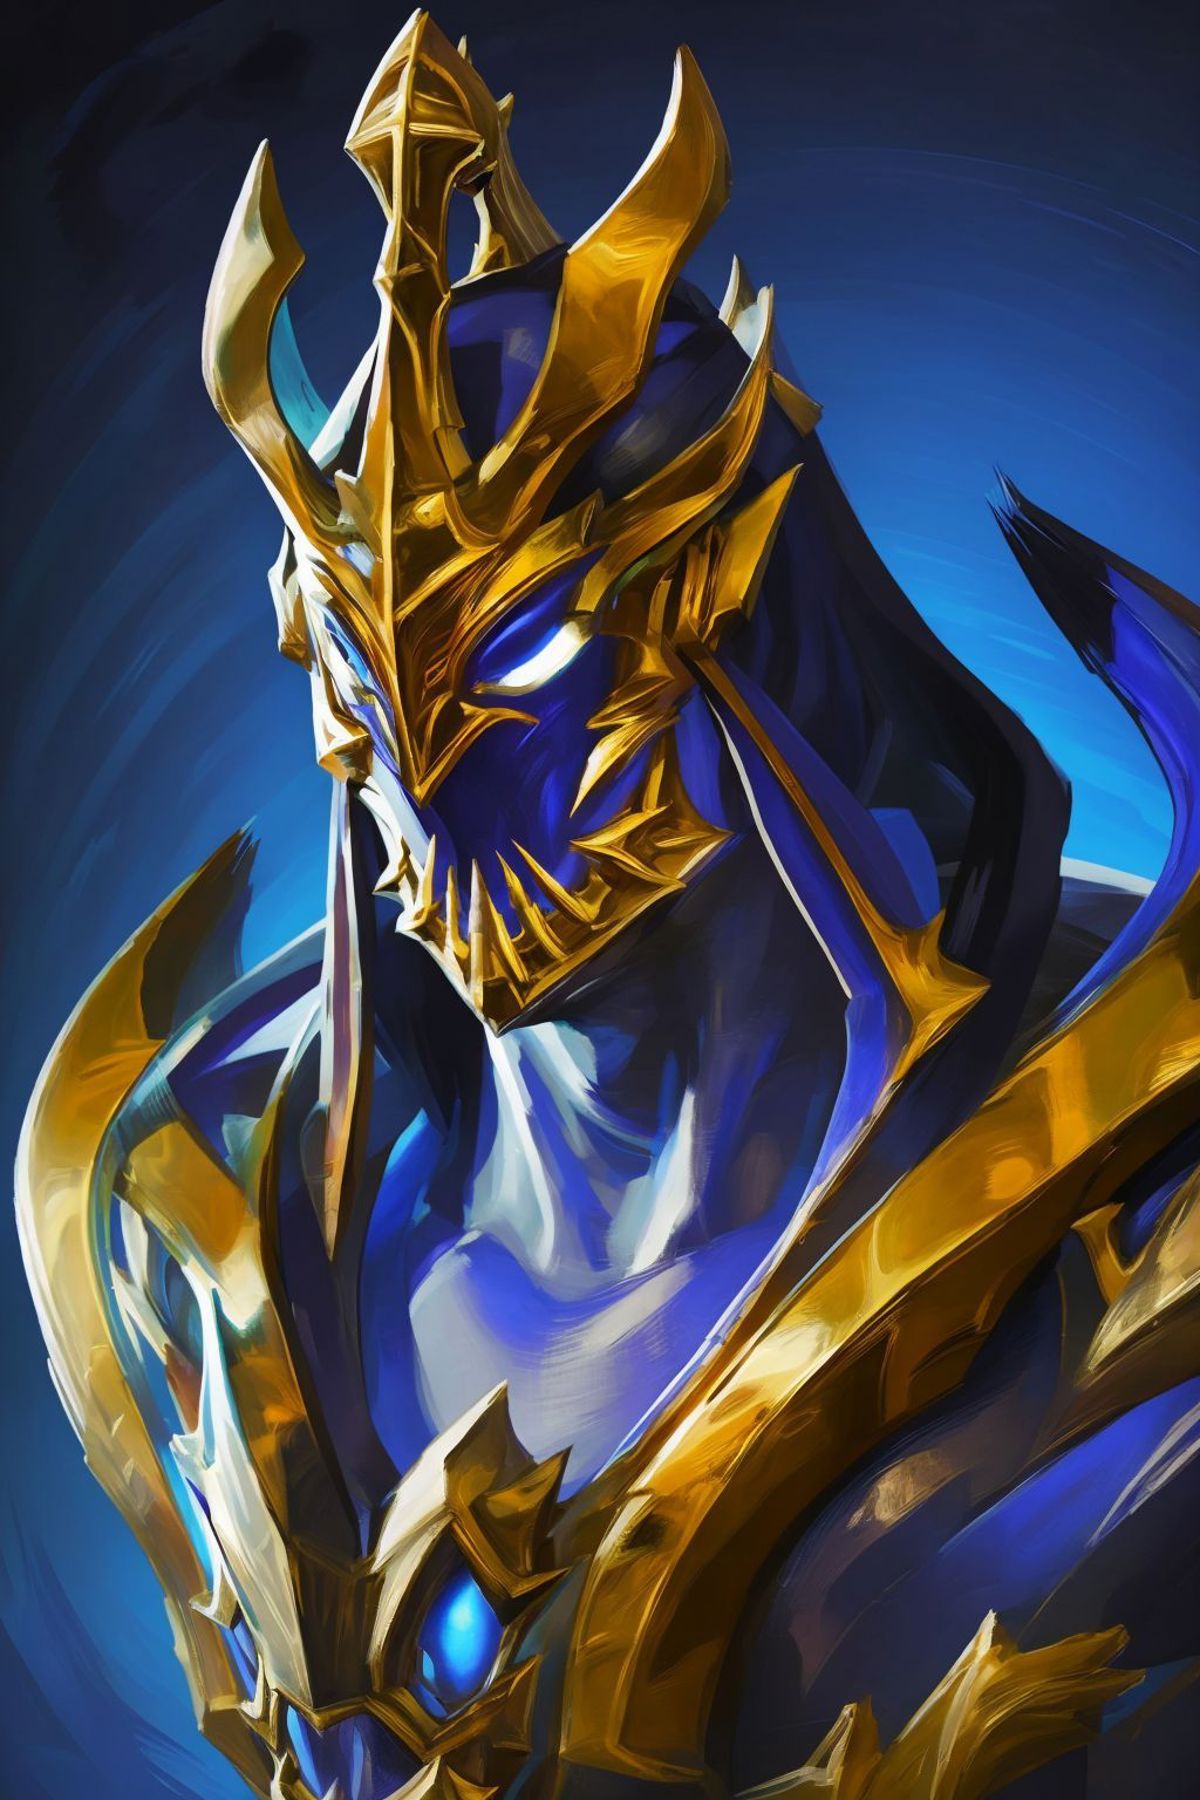 ZED Galaxy Slayer league of legends image by PANyZHAL